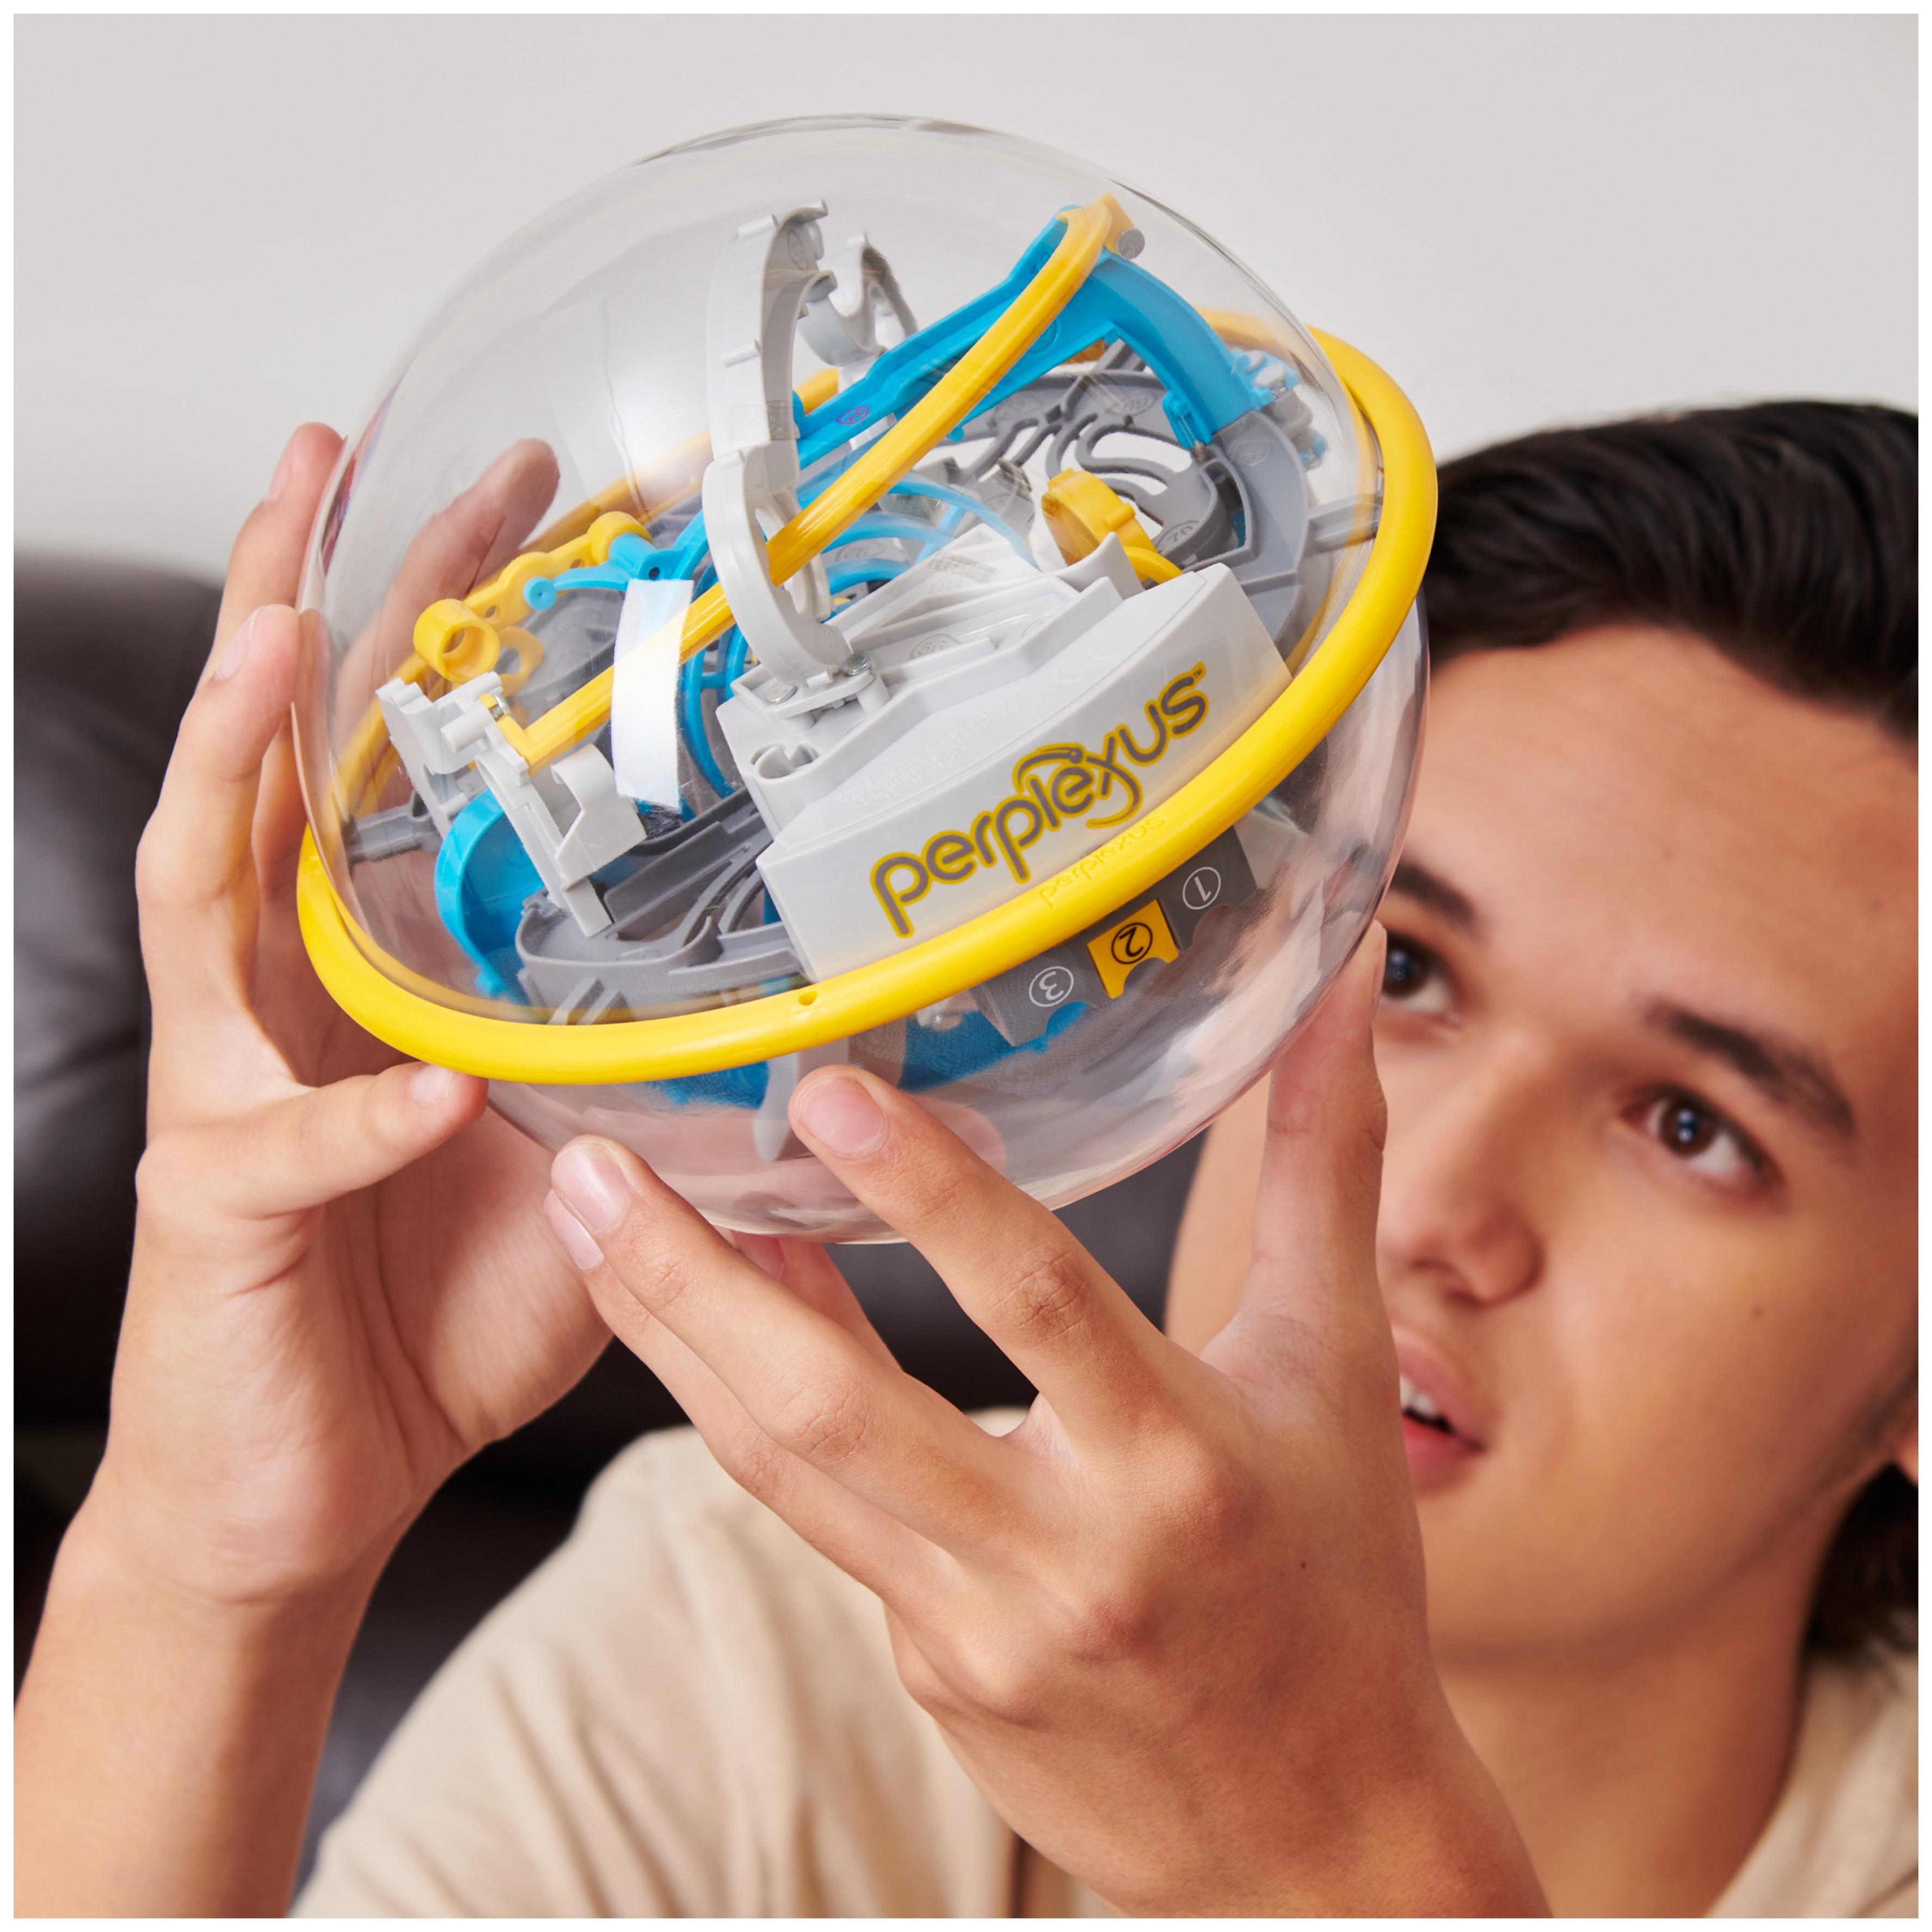 SPIN MASTER GAMES Perplexus, Epic 3D Gravity Maze Game Brain Teaser Fidget  Toy Puzzle Ball, for Kids & Adults Ages 10 and Up